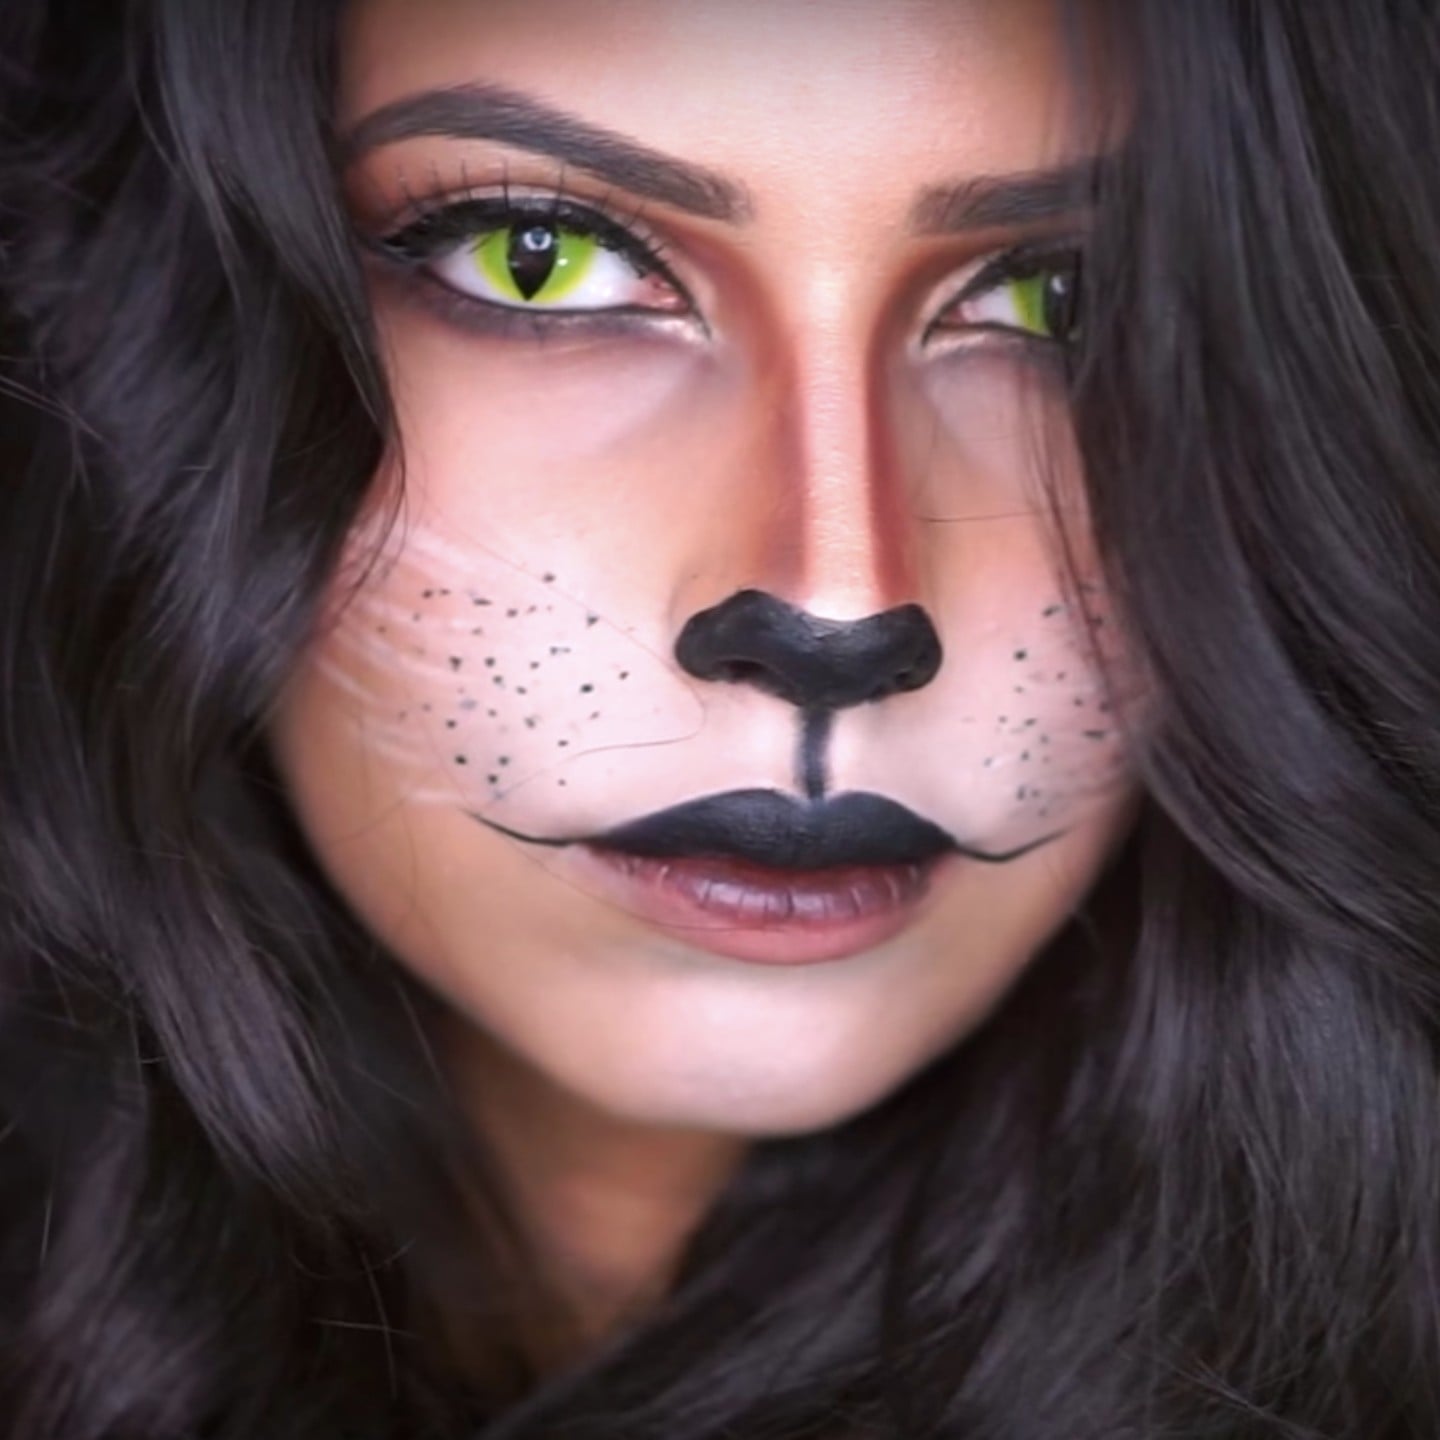 Learn How to Create an Easy Cat Makeup Look for Halloween Using